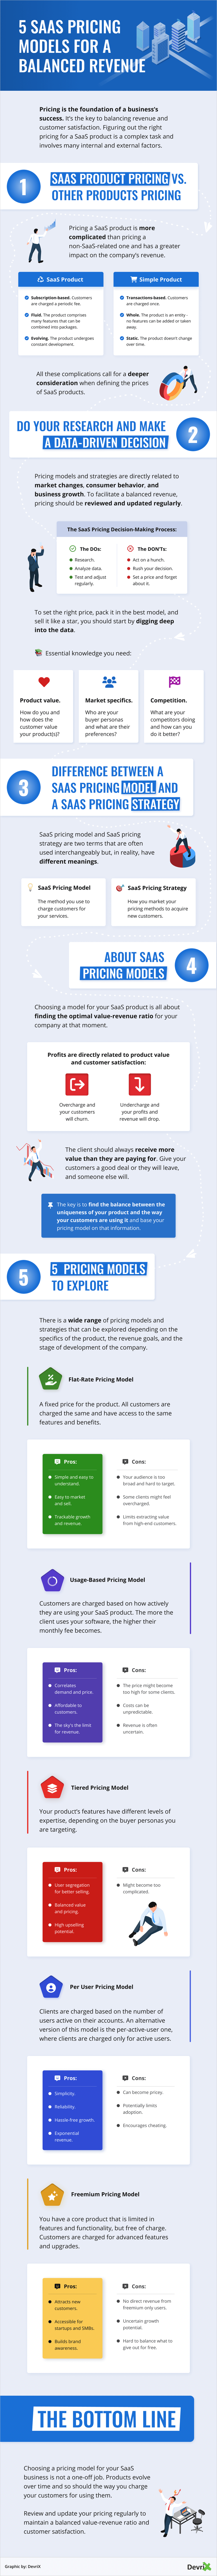 5 SaaS Pricing Models for a Balanced Revenue 2